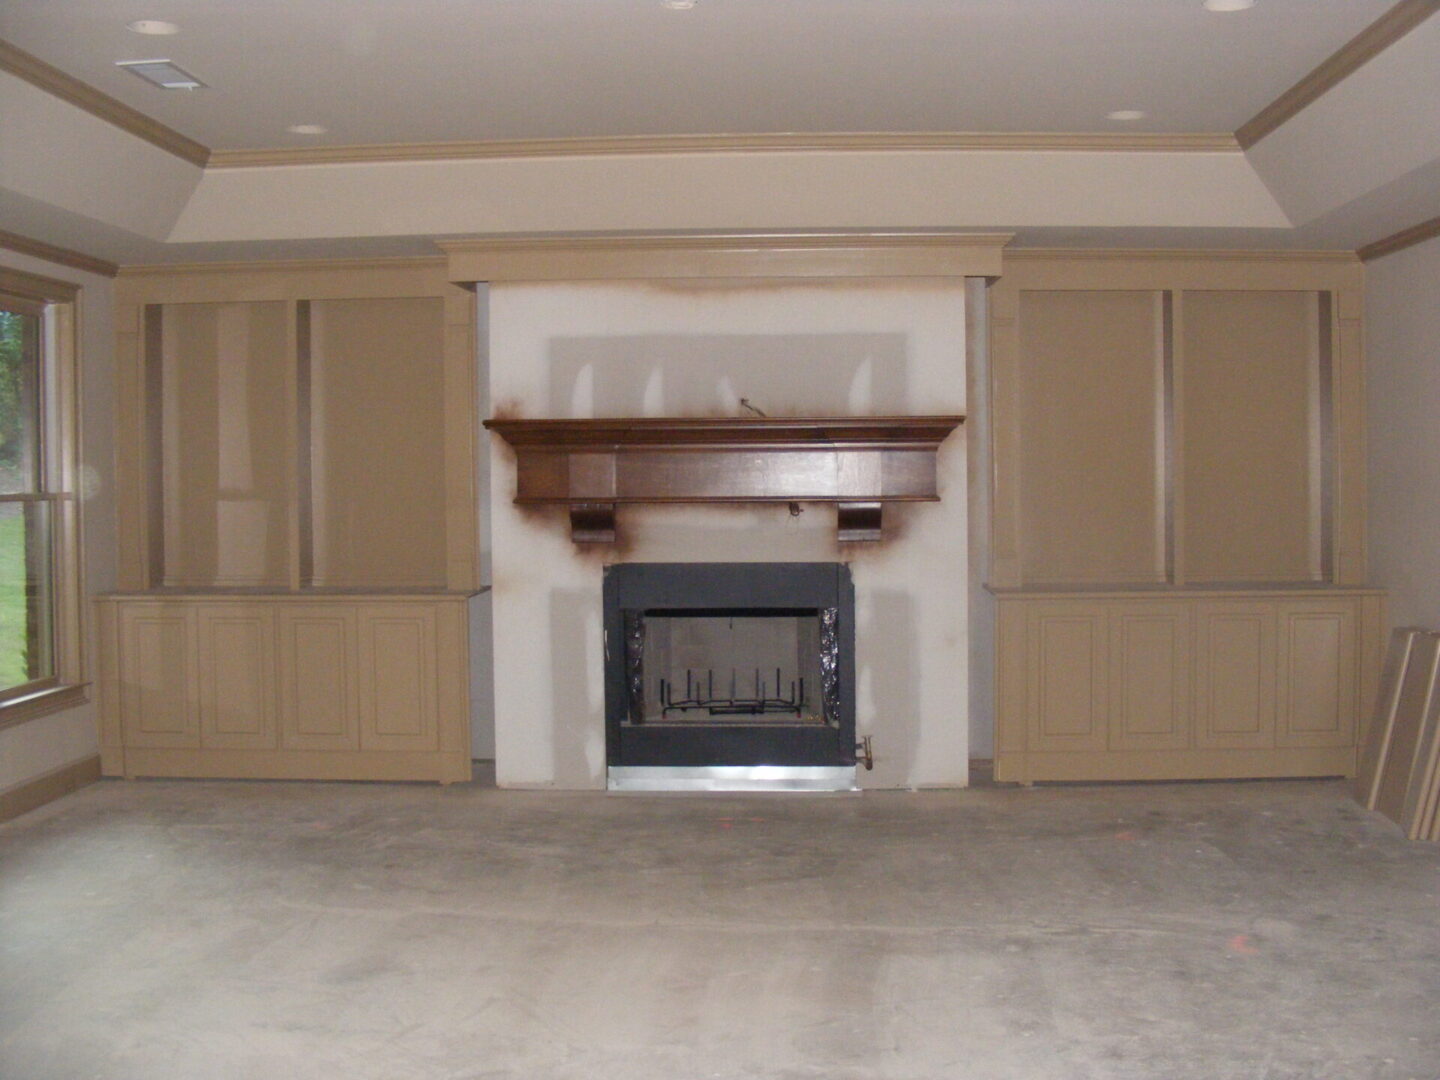 A fireplace in the middle of a room with wooden cabinets.